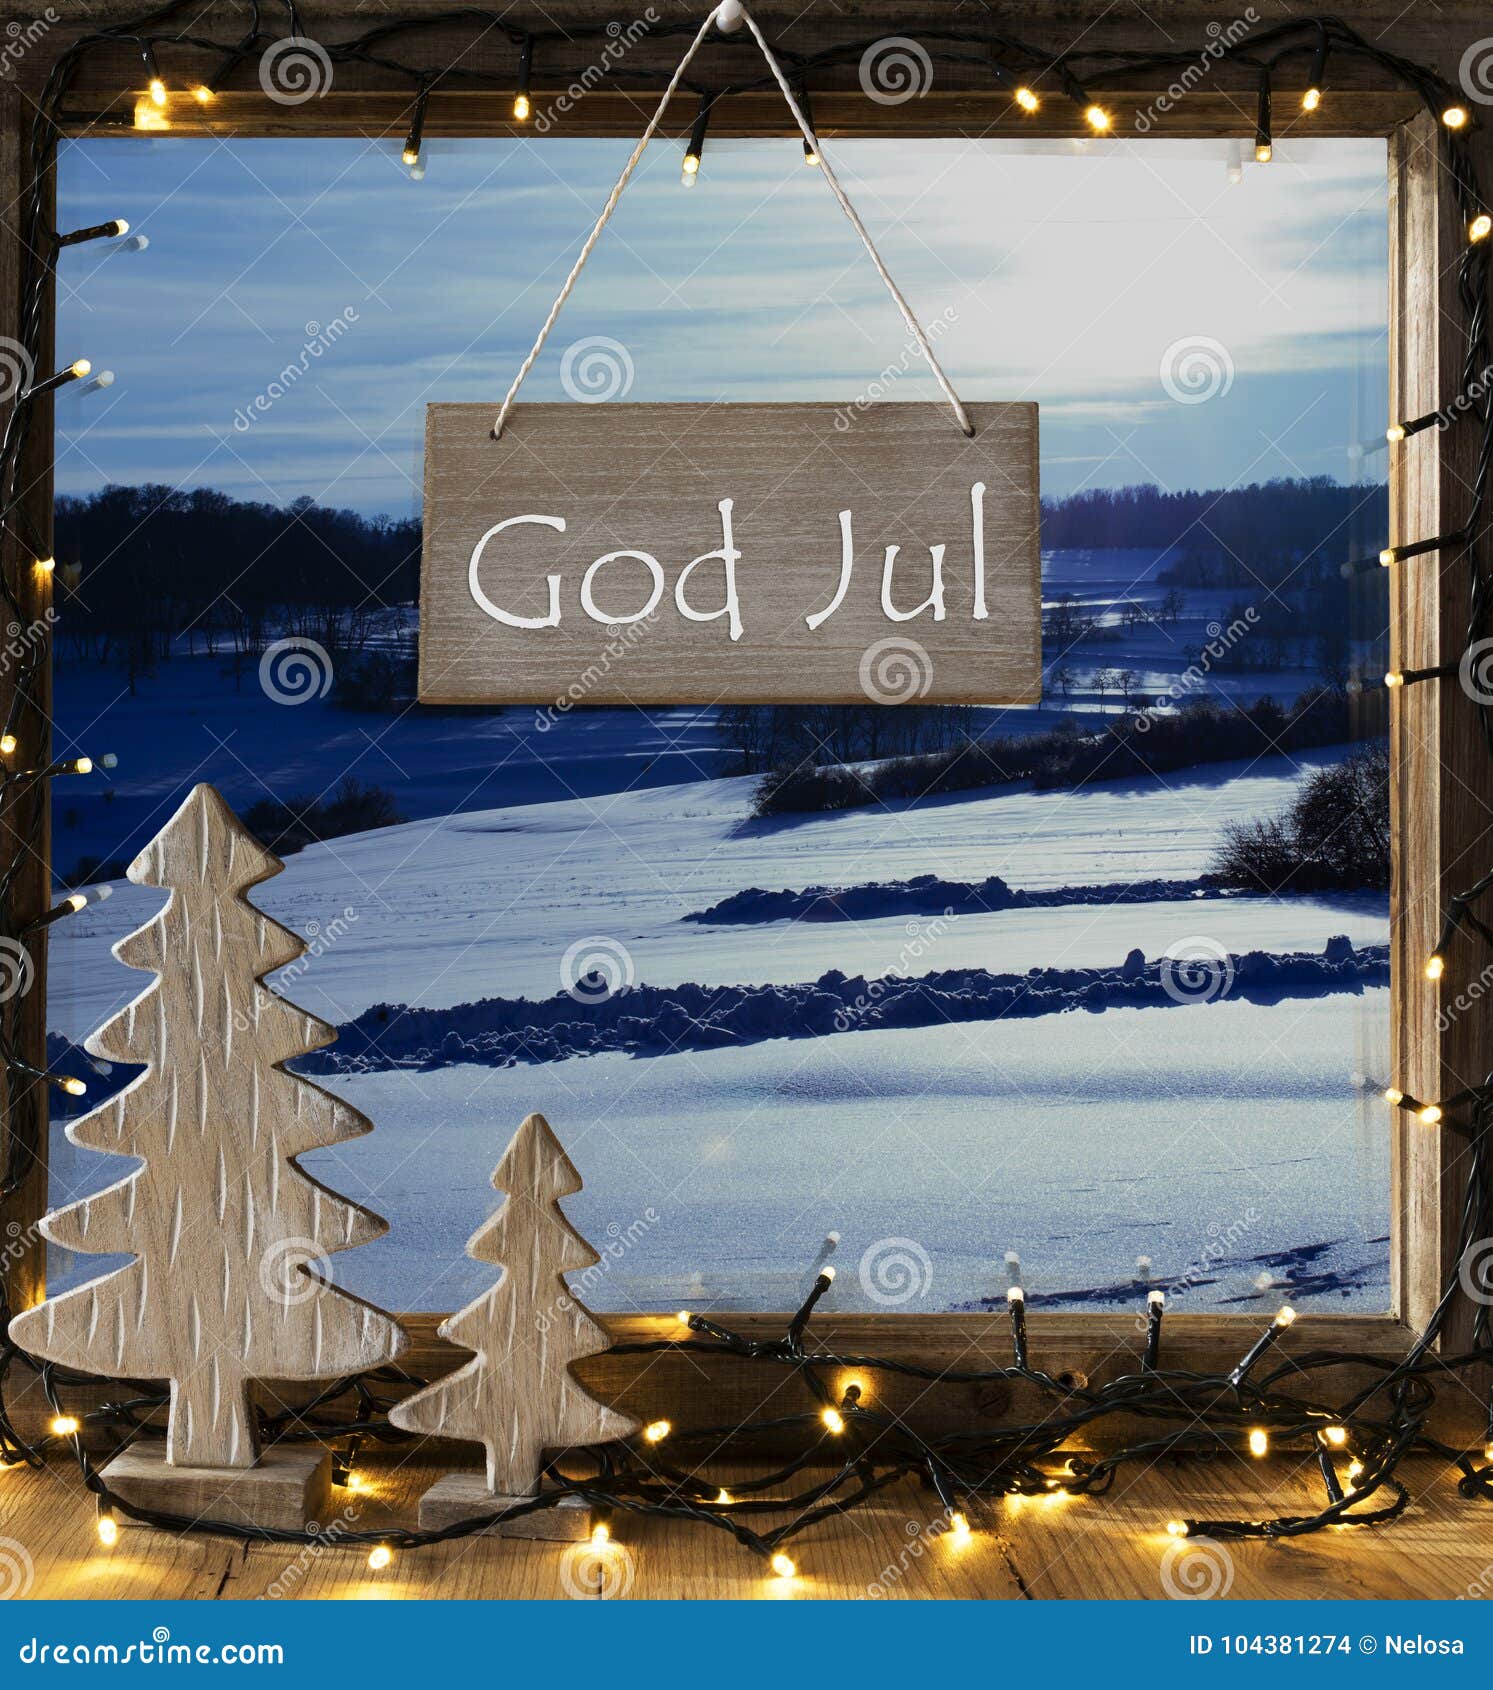 Download Window Winter Landscape God Jul Means Merry Christmas Stock Image of